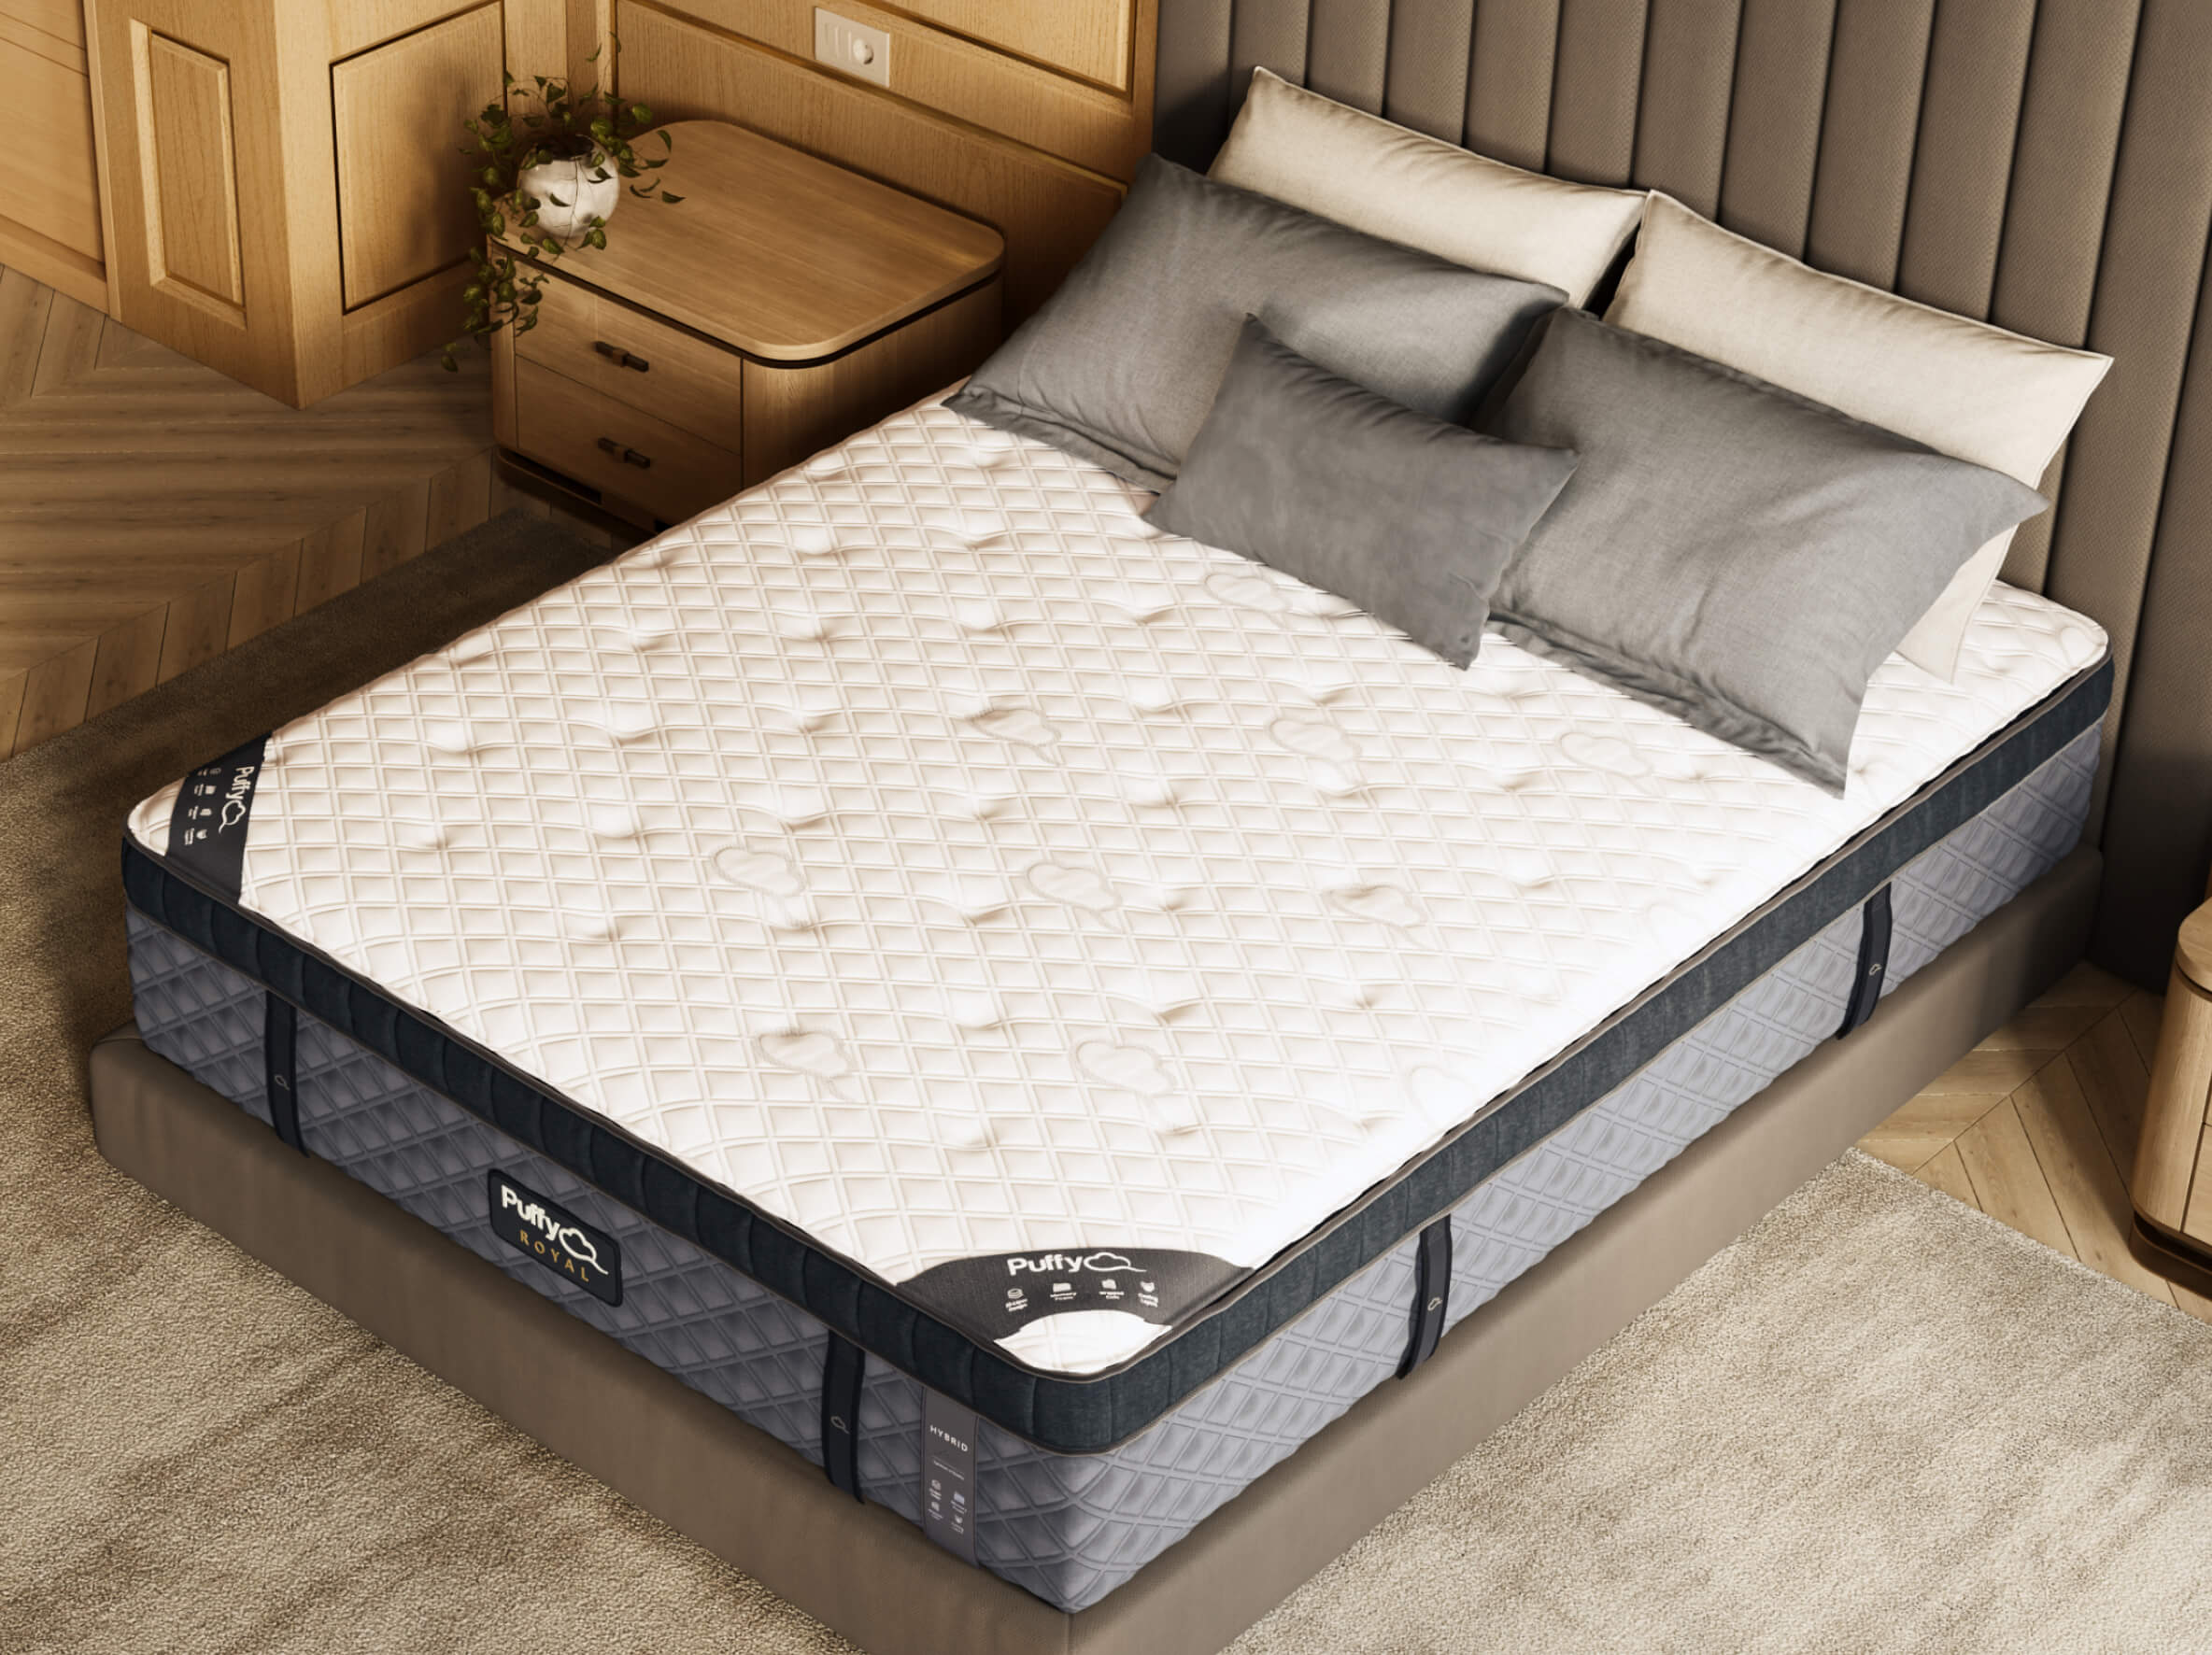 Puffy’s New Hybrid Mattress Range With Coils Is Designed For Perfect Sleep